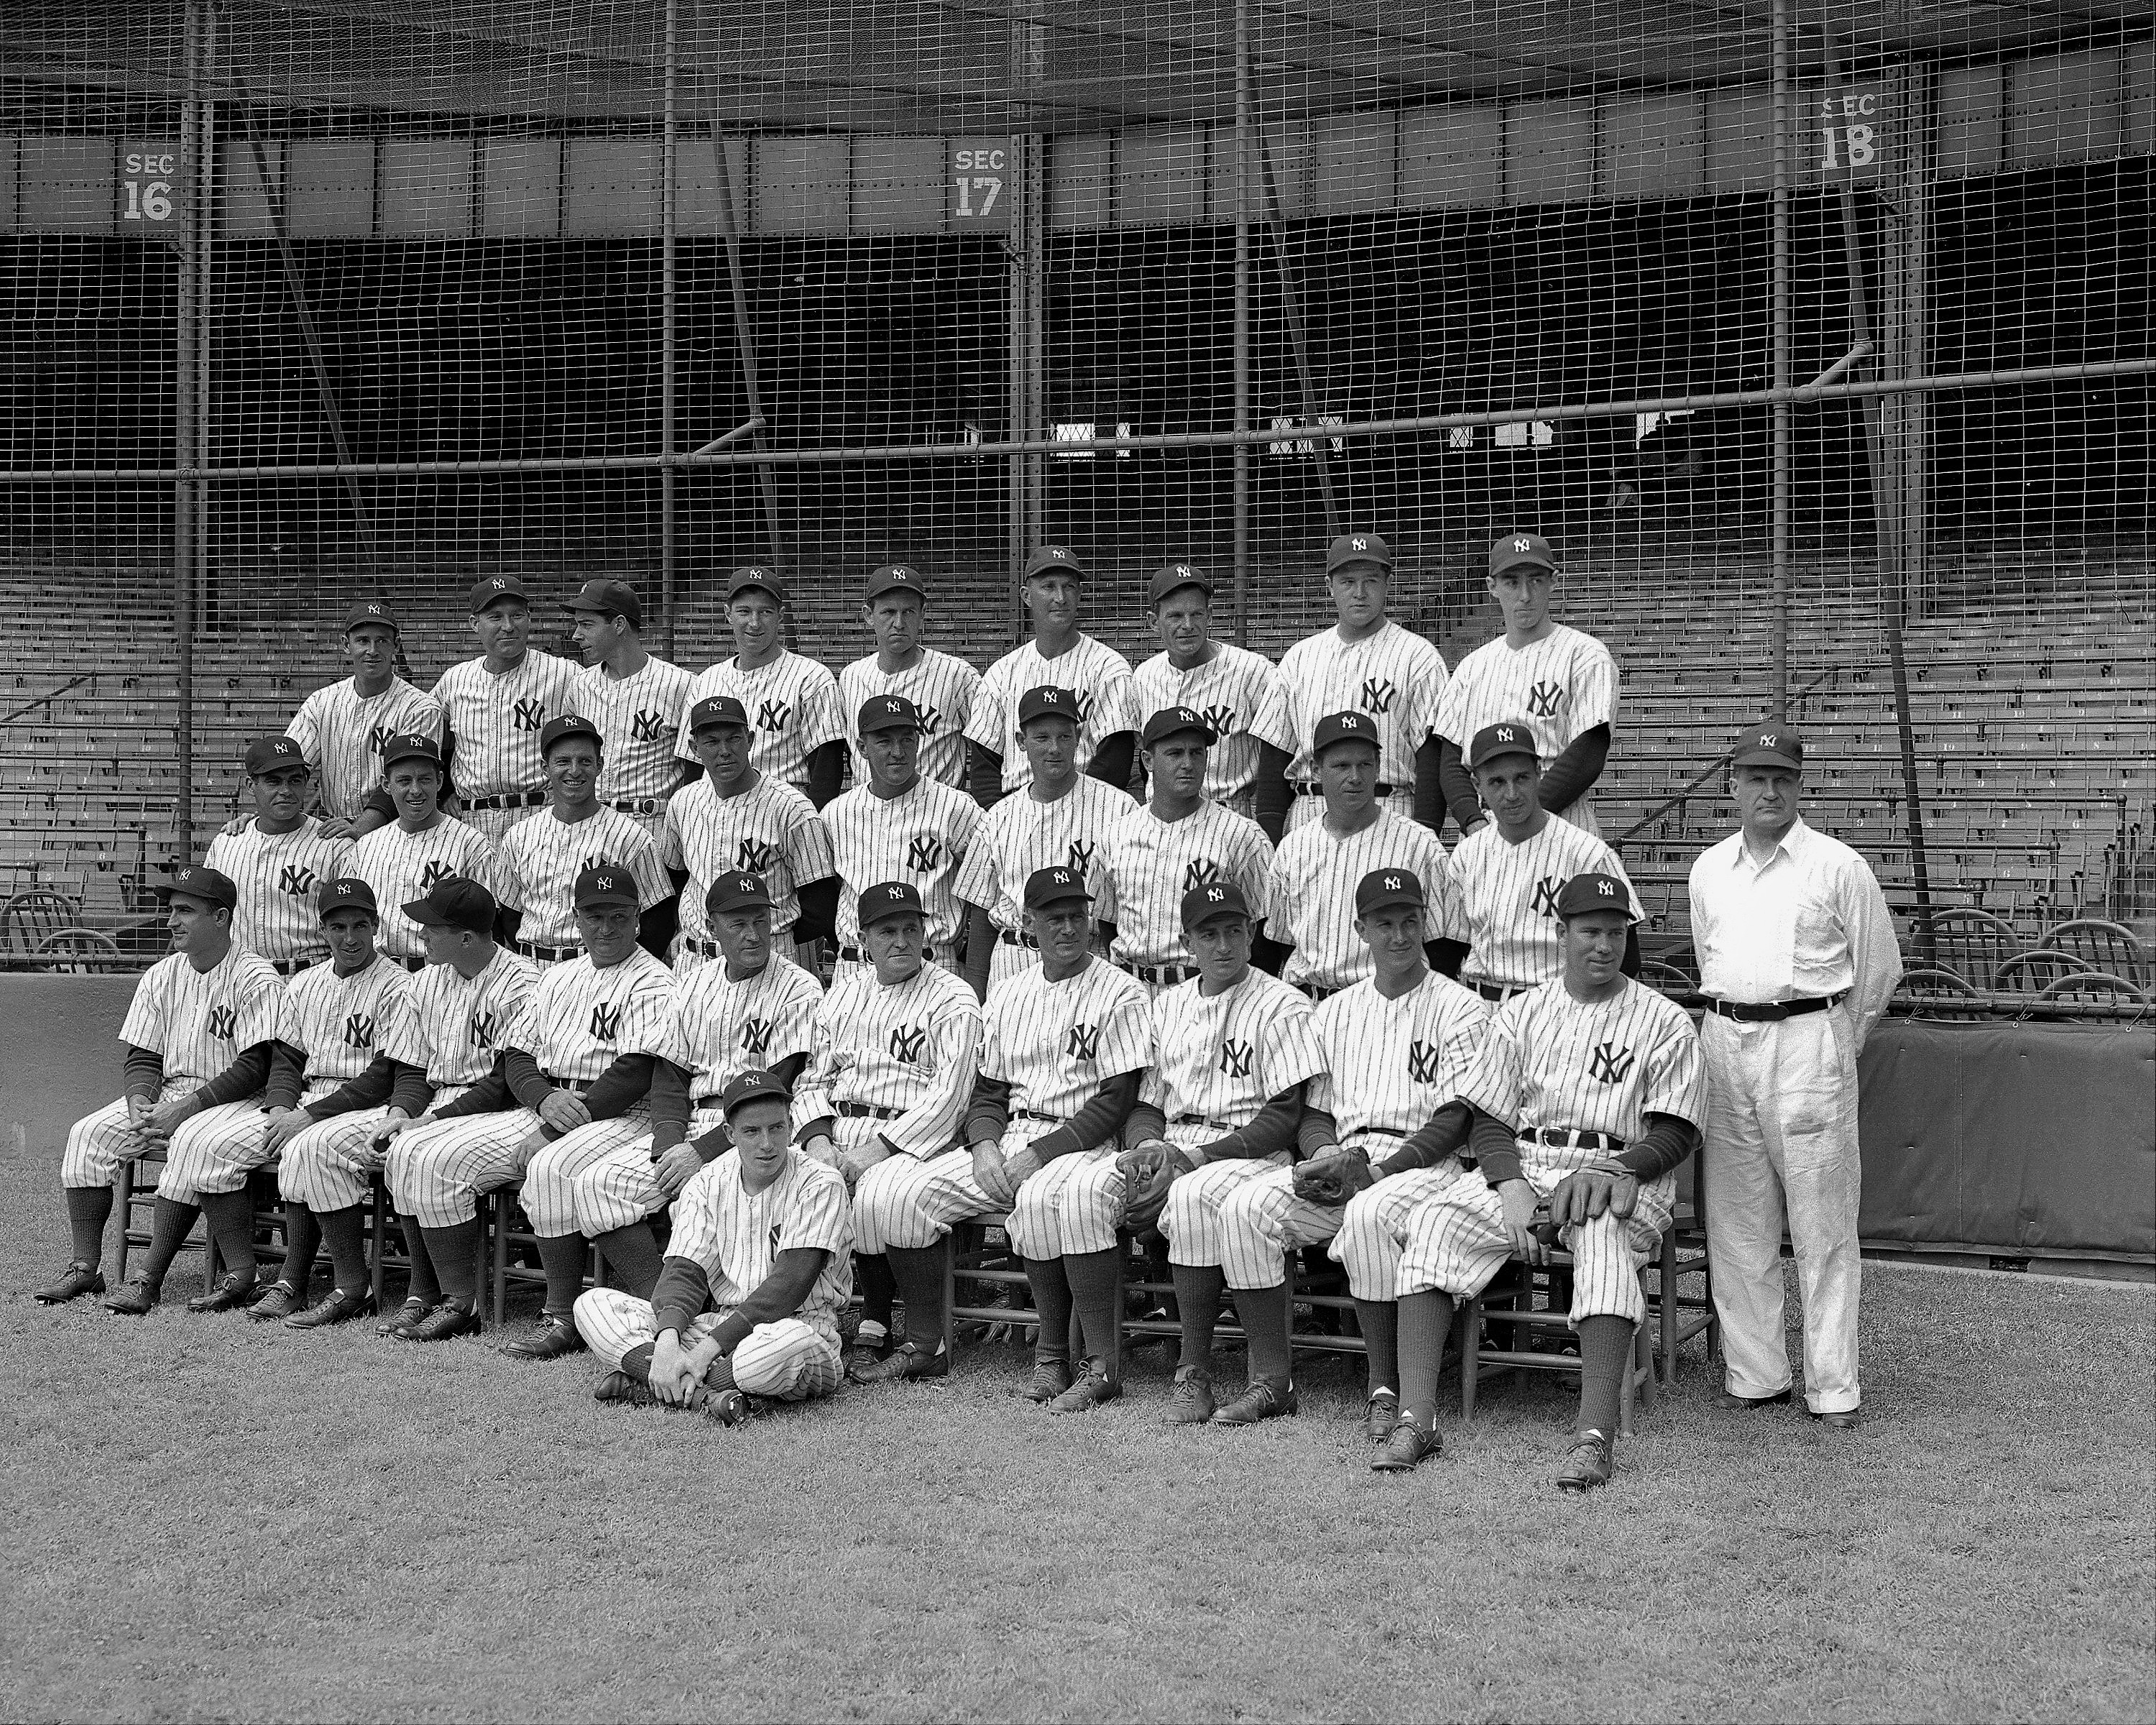 Yankees gather for team photo en route to World Series 1941